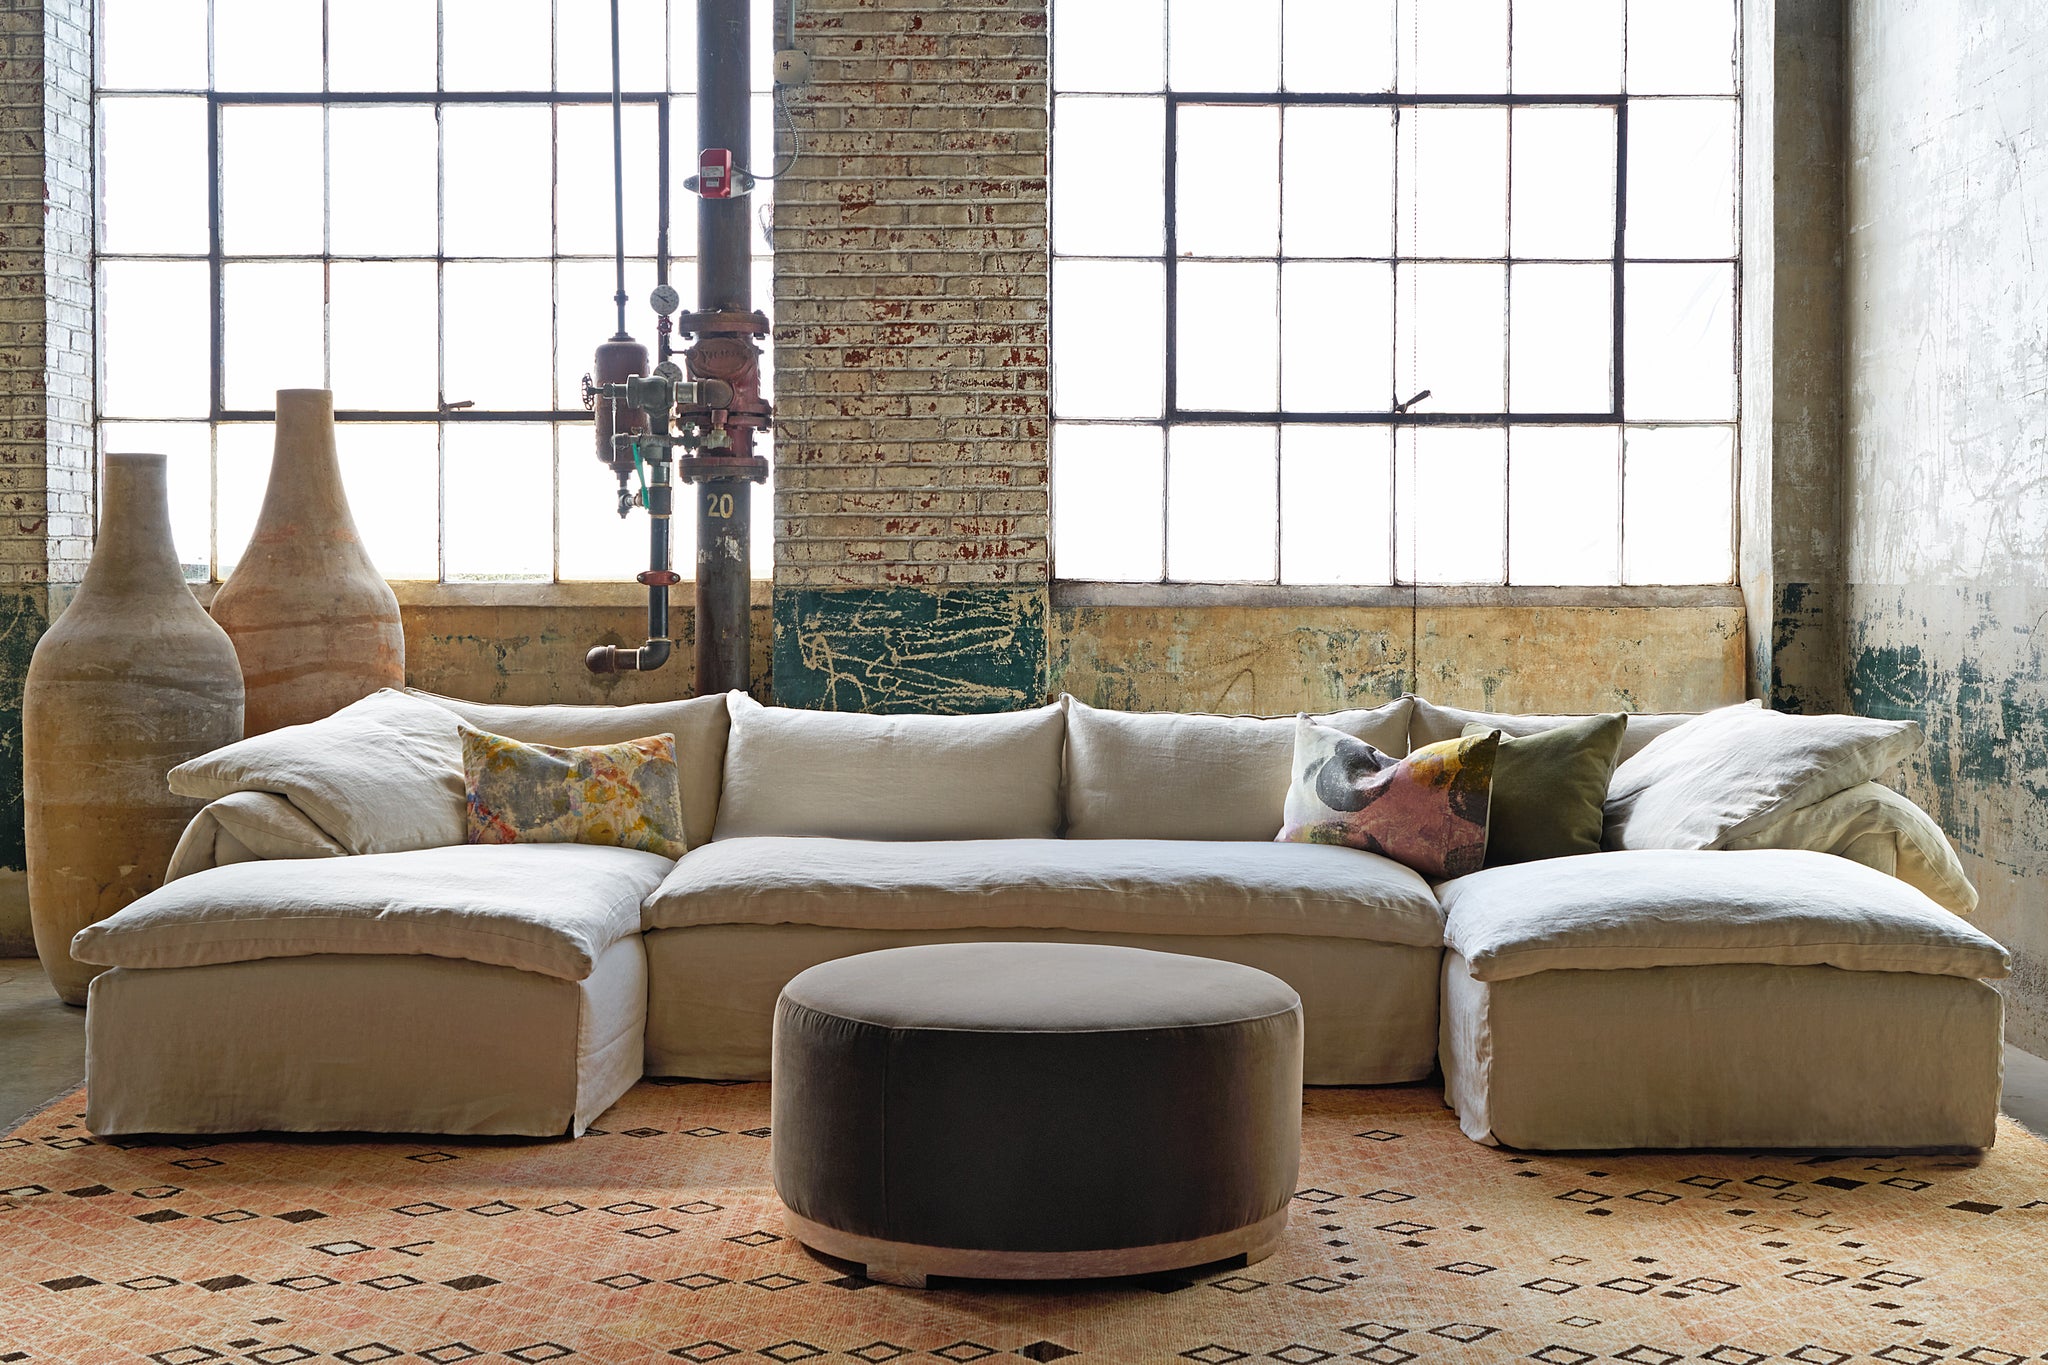  Large 3 piece sectional in front of windows with a pouf in front. Photographed in Lucas Cafe. 